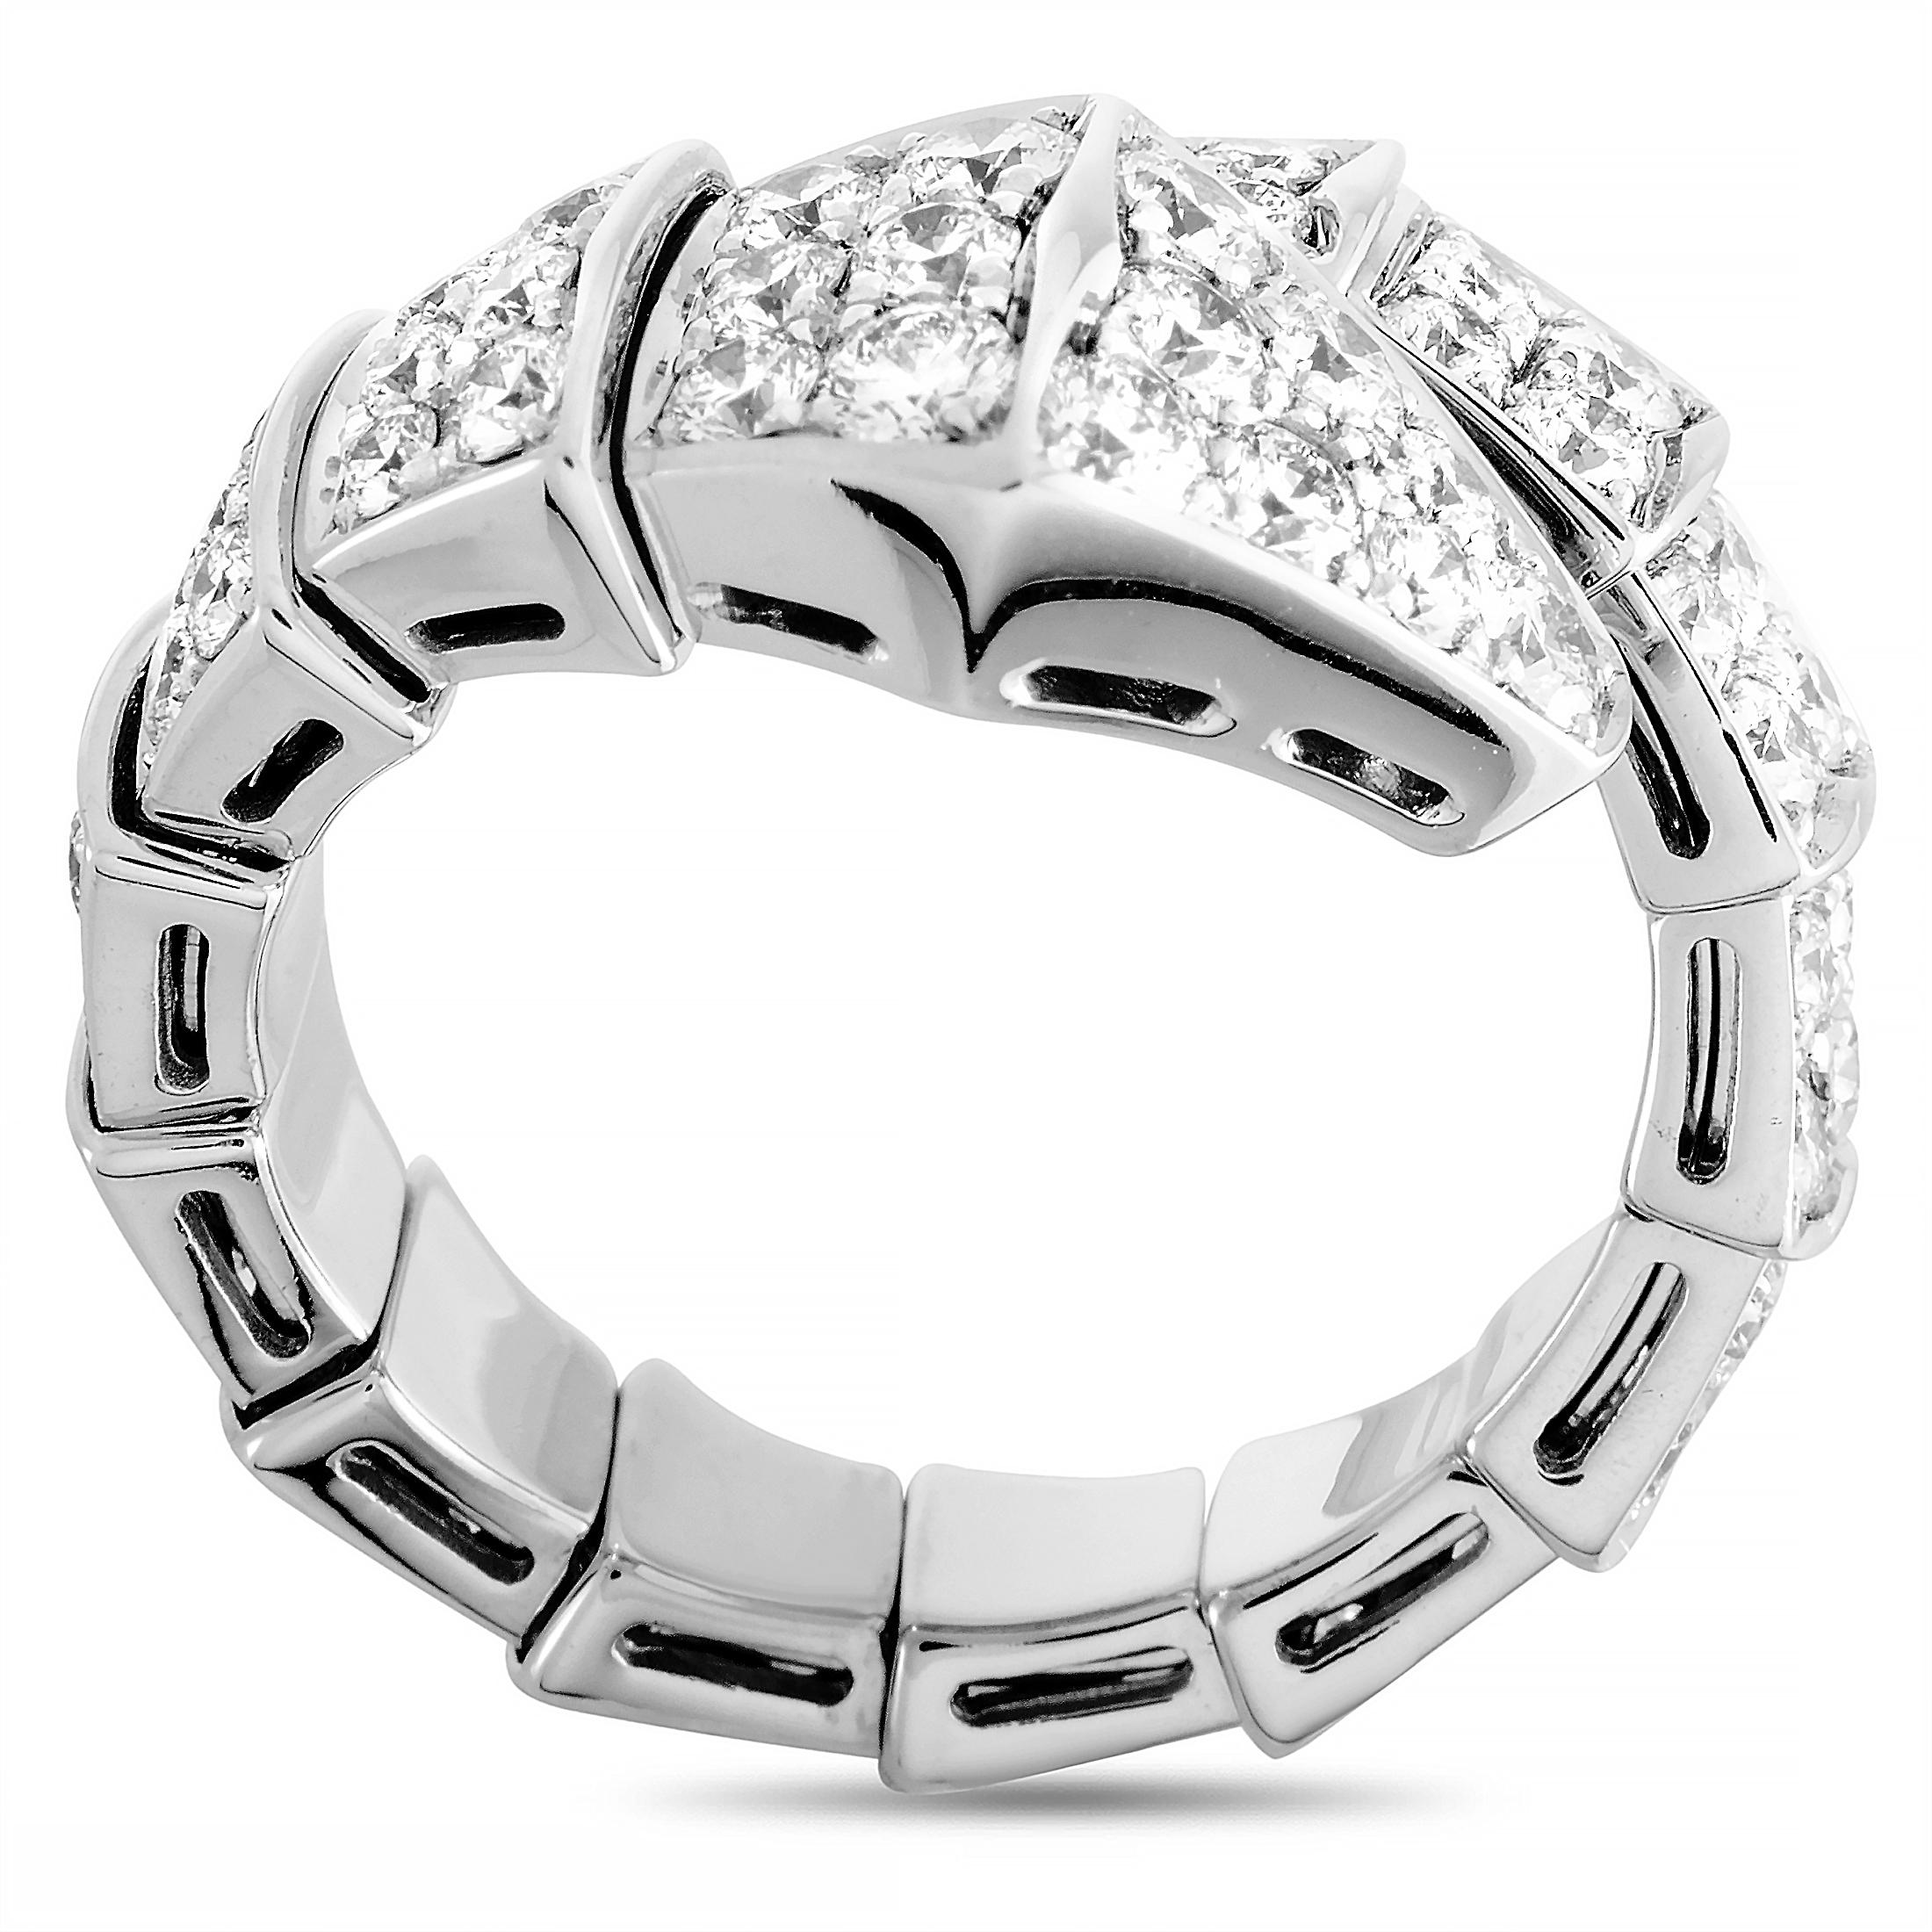 The Bvlgari “Serpenti” ring is made out of 18K white gold and diamonds and weighs 8.7 grams. The ring boasts band thickness of 5 mm and top height of 5 mm, while top dimensions measure 13 by 20 mm.